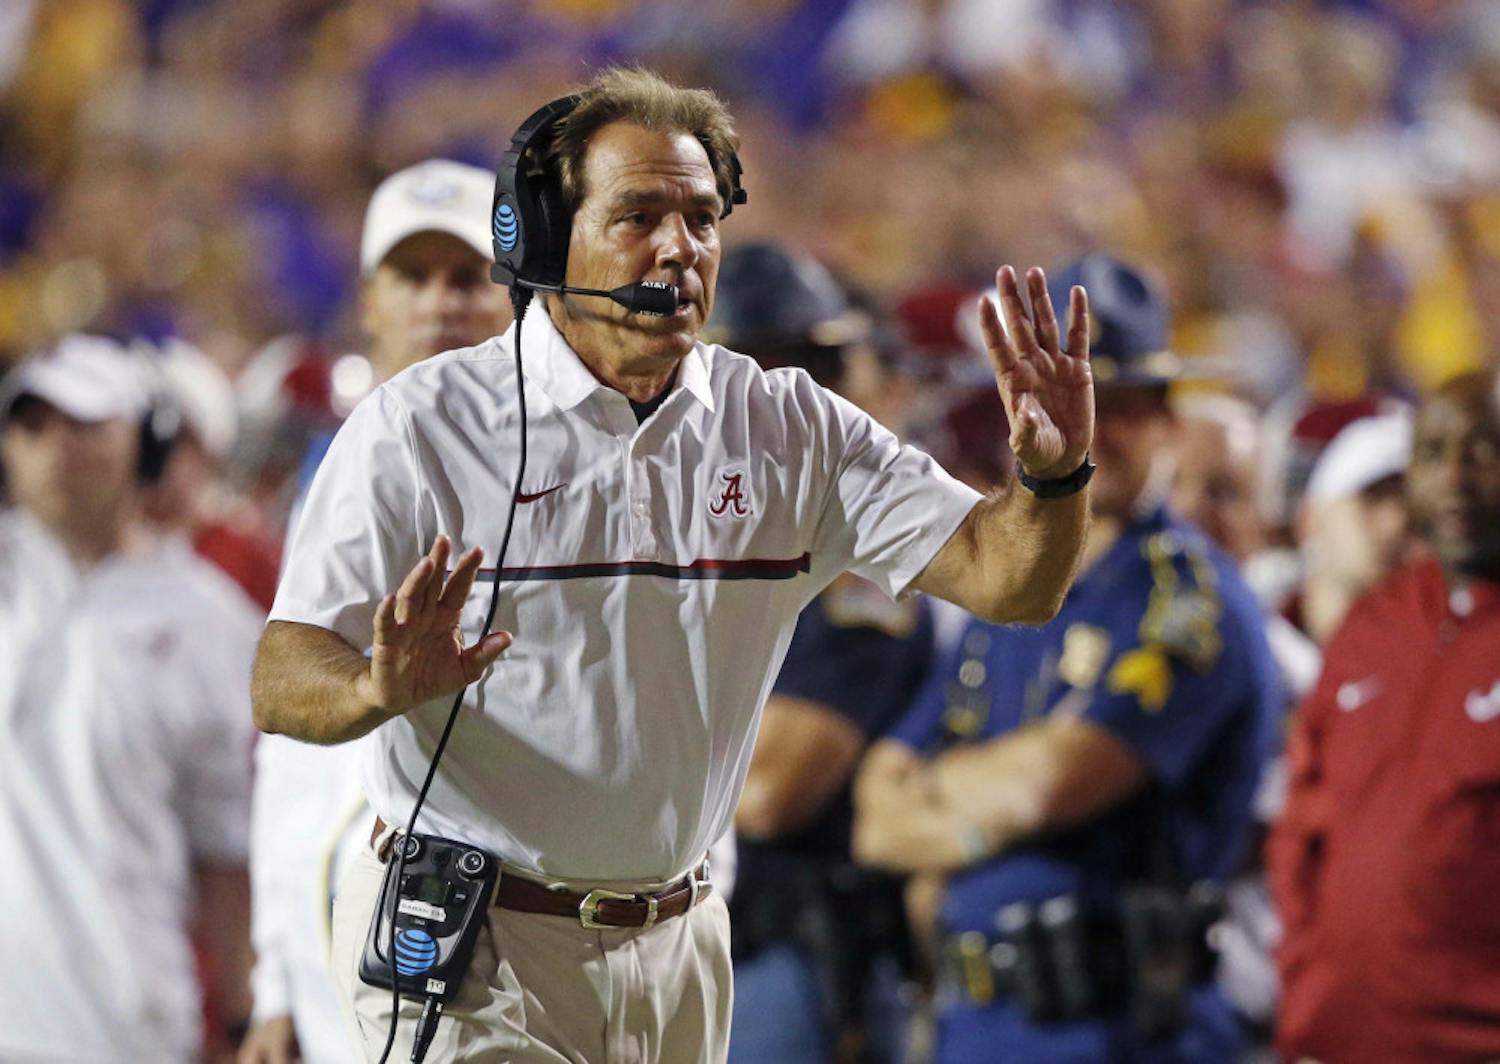 Alabama head coach Nick Saban tries to get the referee's attention as the play clock approaches zero in the second half of an NCAA college football game against LSU in Baton Rouge, La., Saturday, Nov. 5, 2016. Alabama won 10-0. (AP Photo/Gerald Herbert)